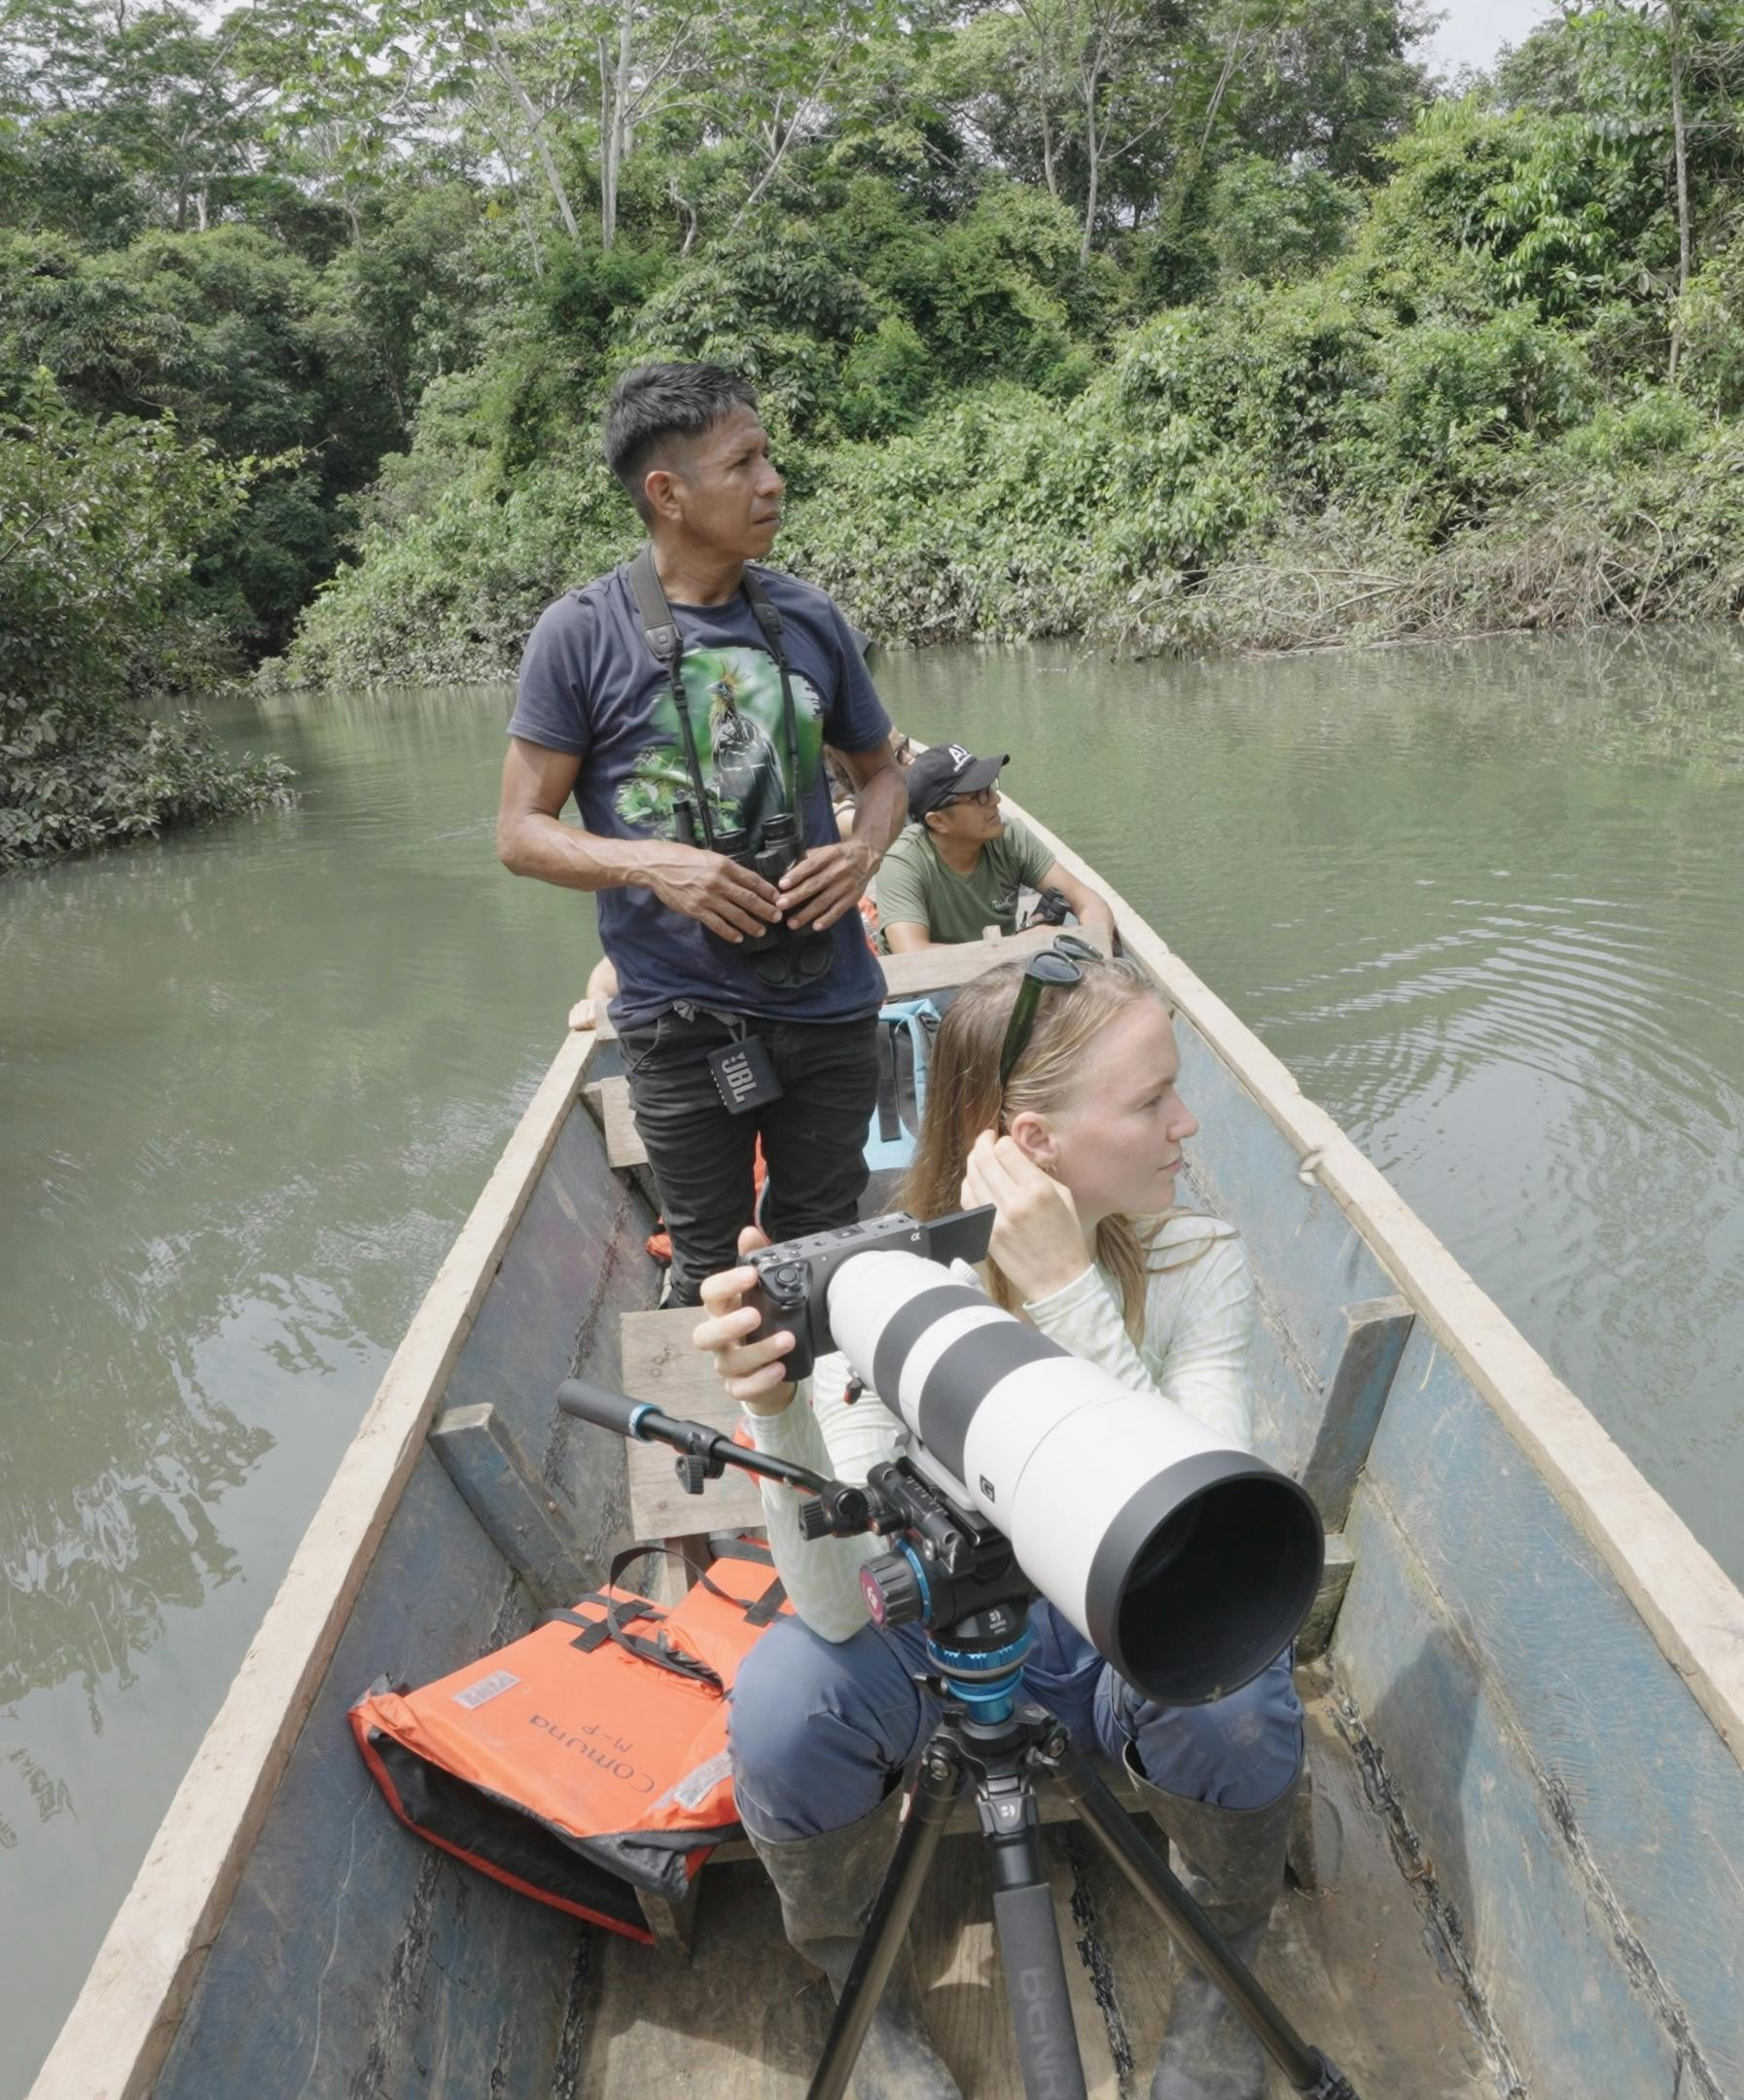 guided tour on the river of the Yasuní rainforest